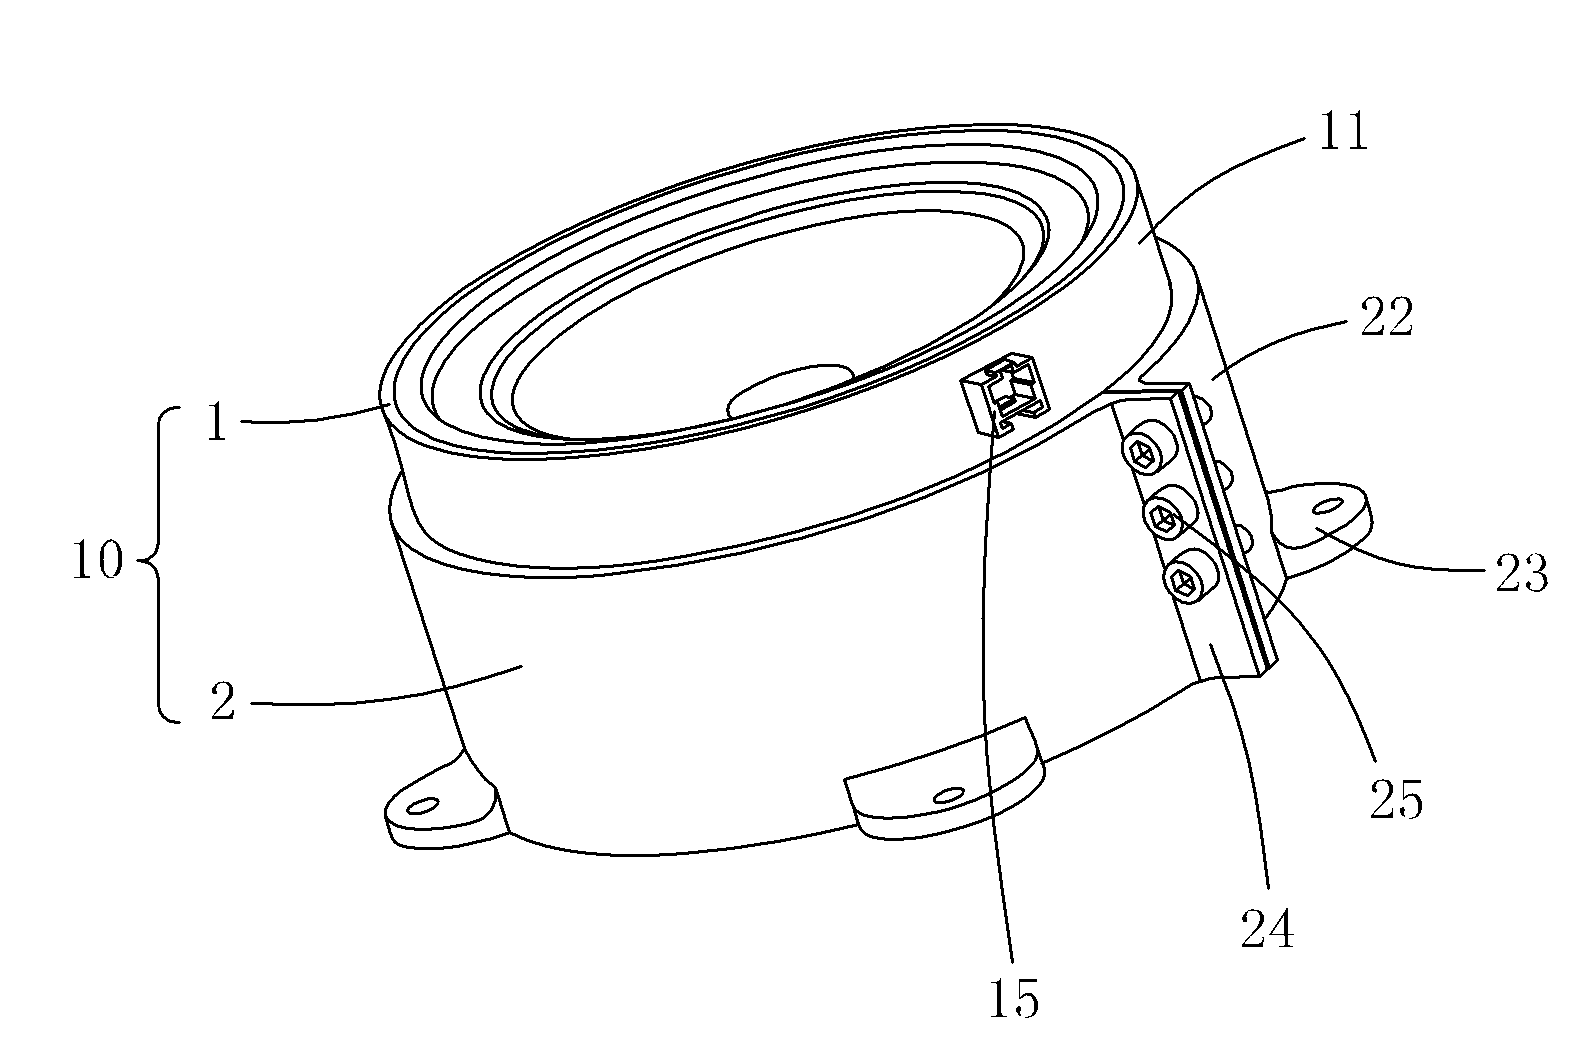 Speaker component with platformized basin stand